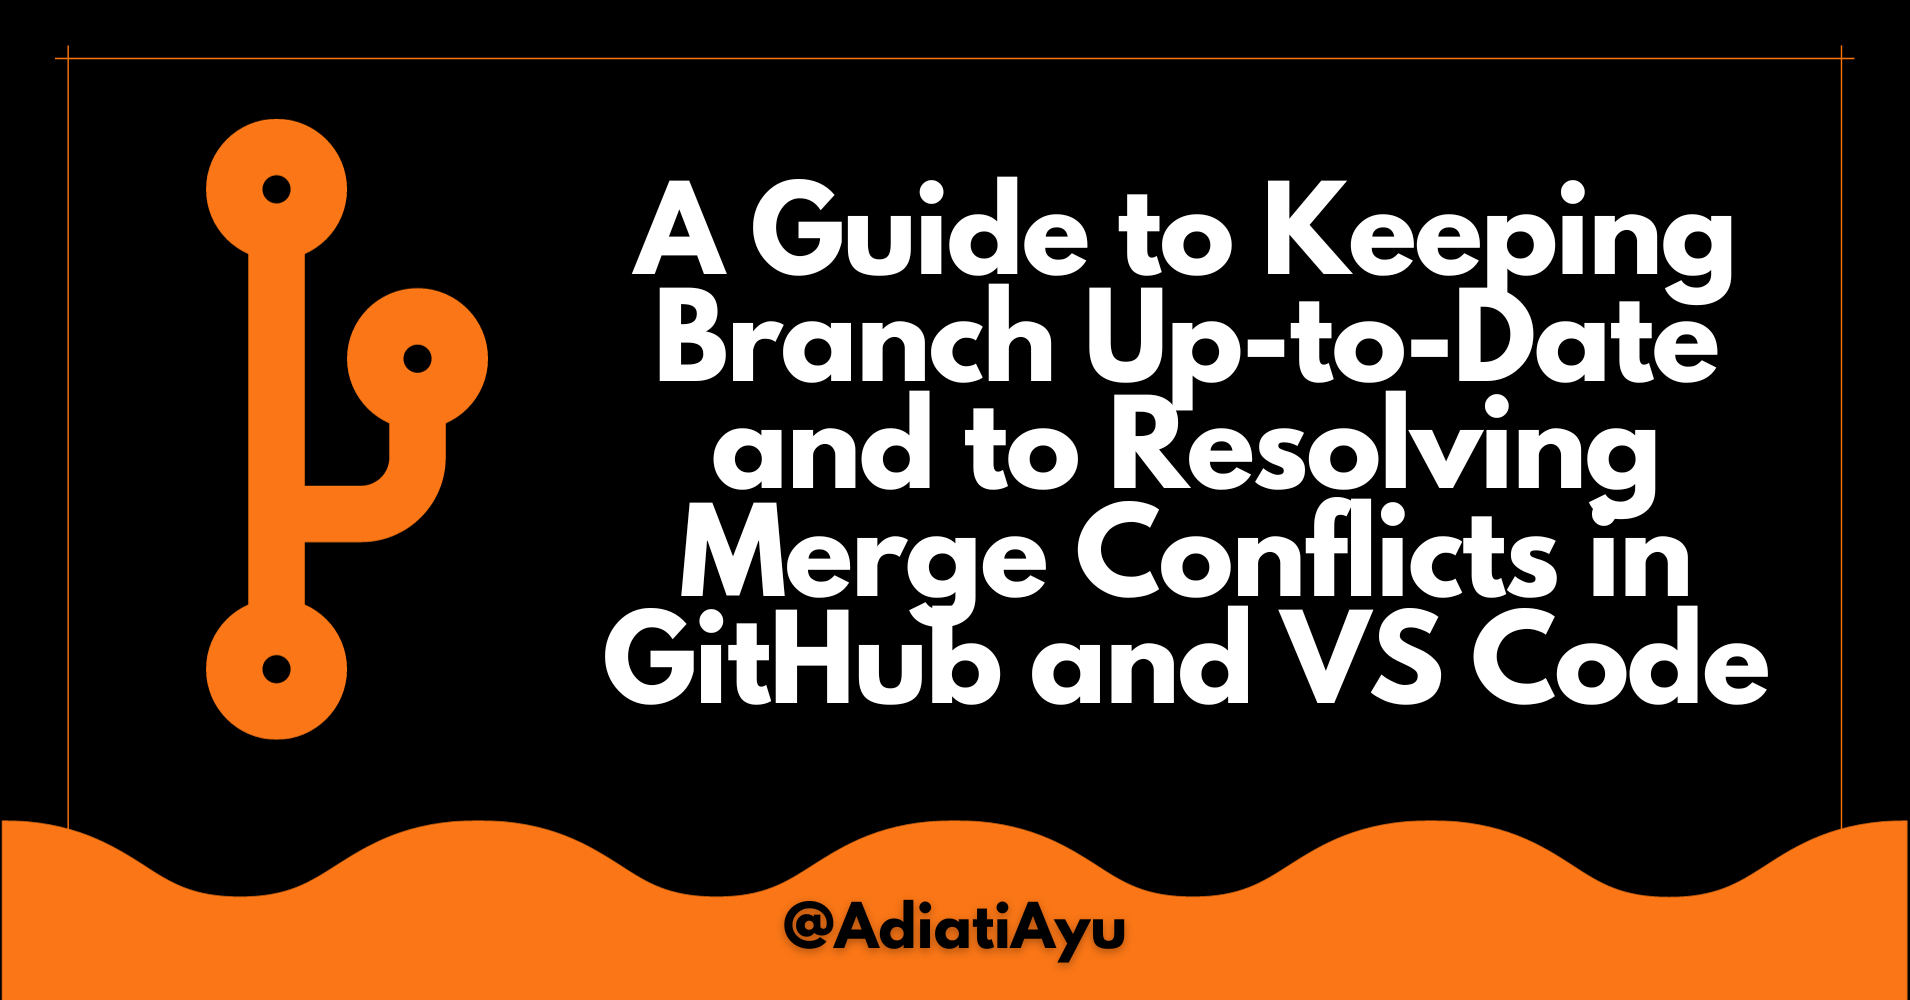 How to Keep Branches Up-to-Date and Resolve Merge Conflicts in GitHub and VS Code